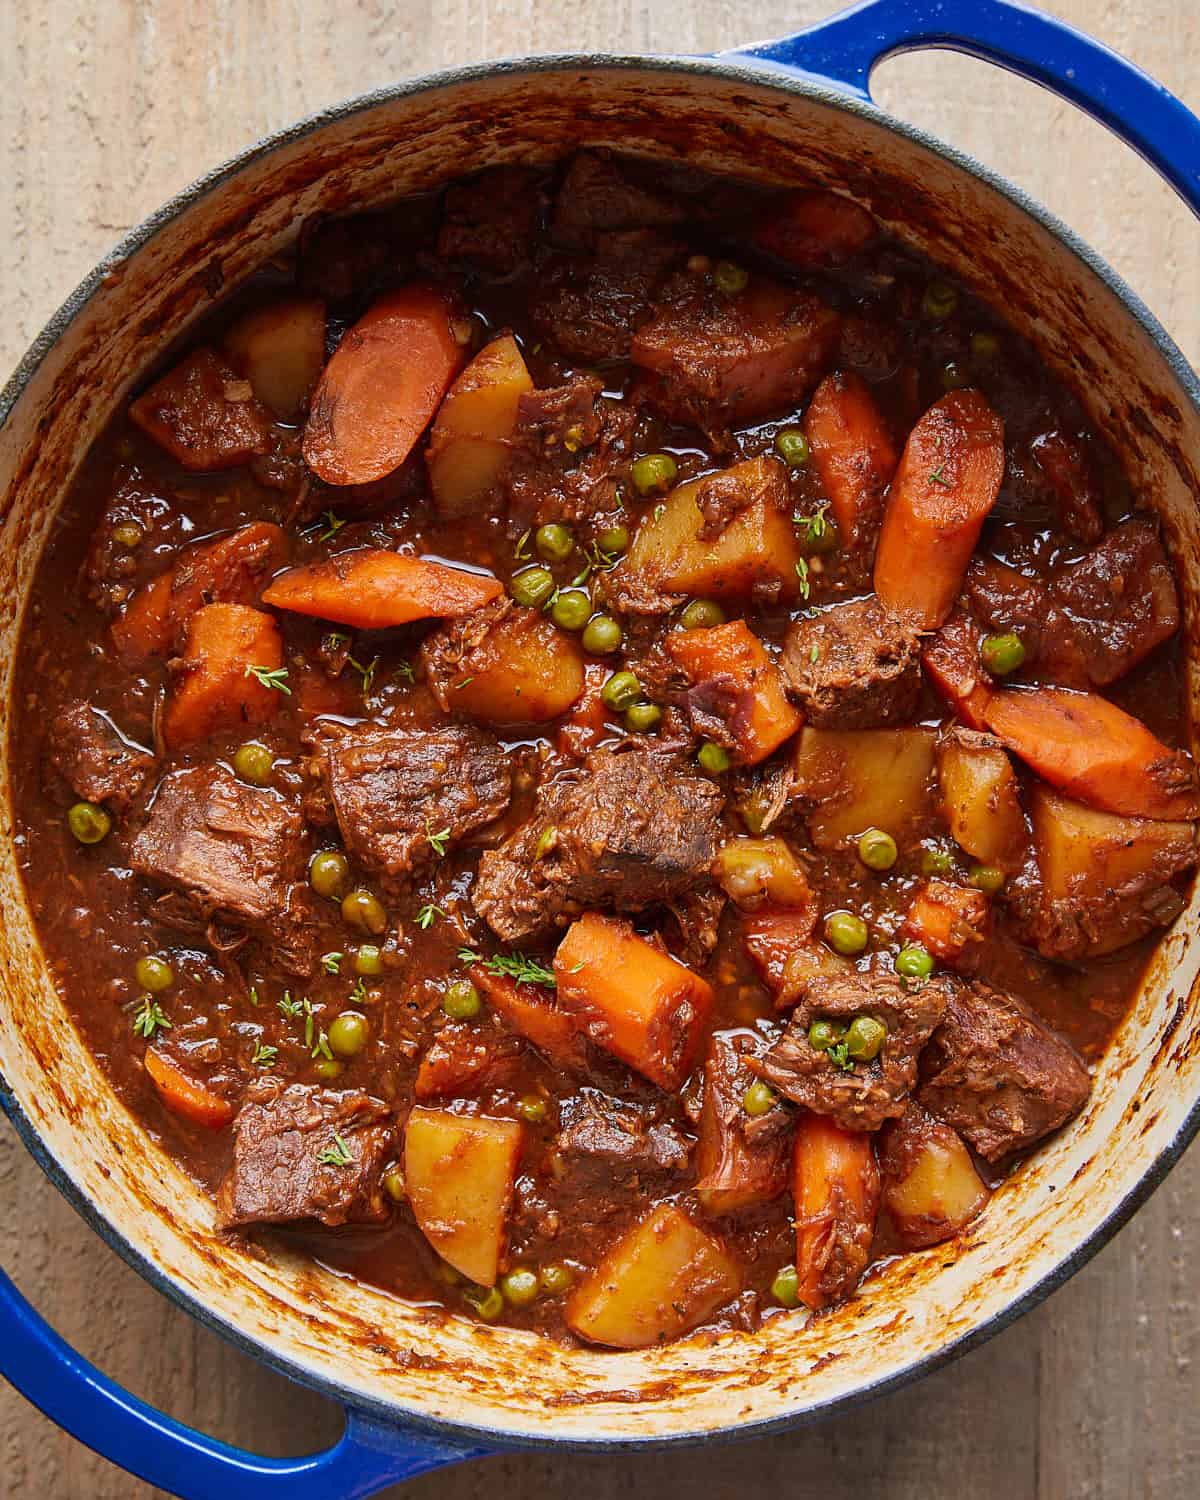 Overhead image of old fashioned beef stew in blue pot.